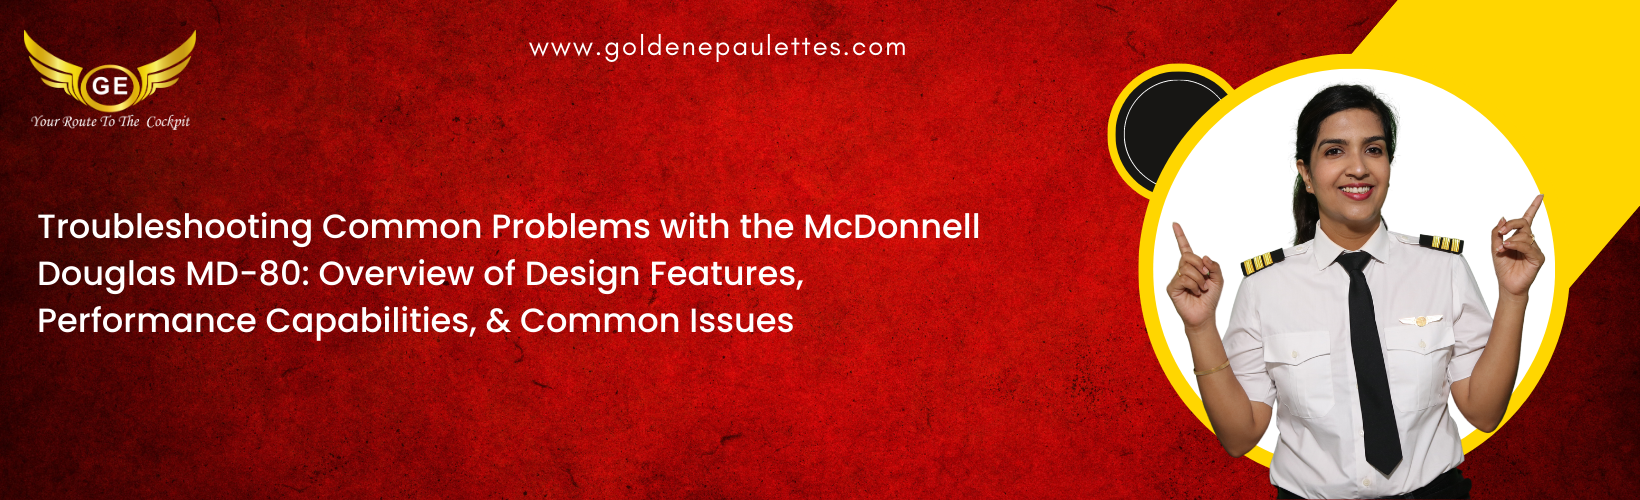 Troubleshooting Common Problems with the McDonnell Douglas MD